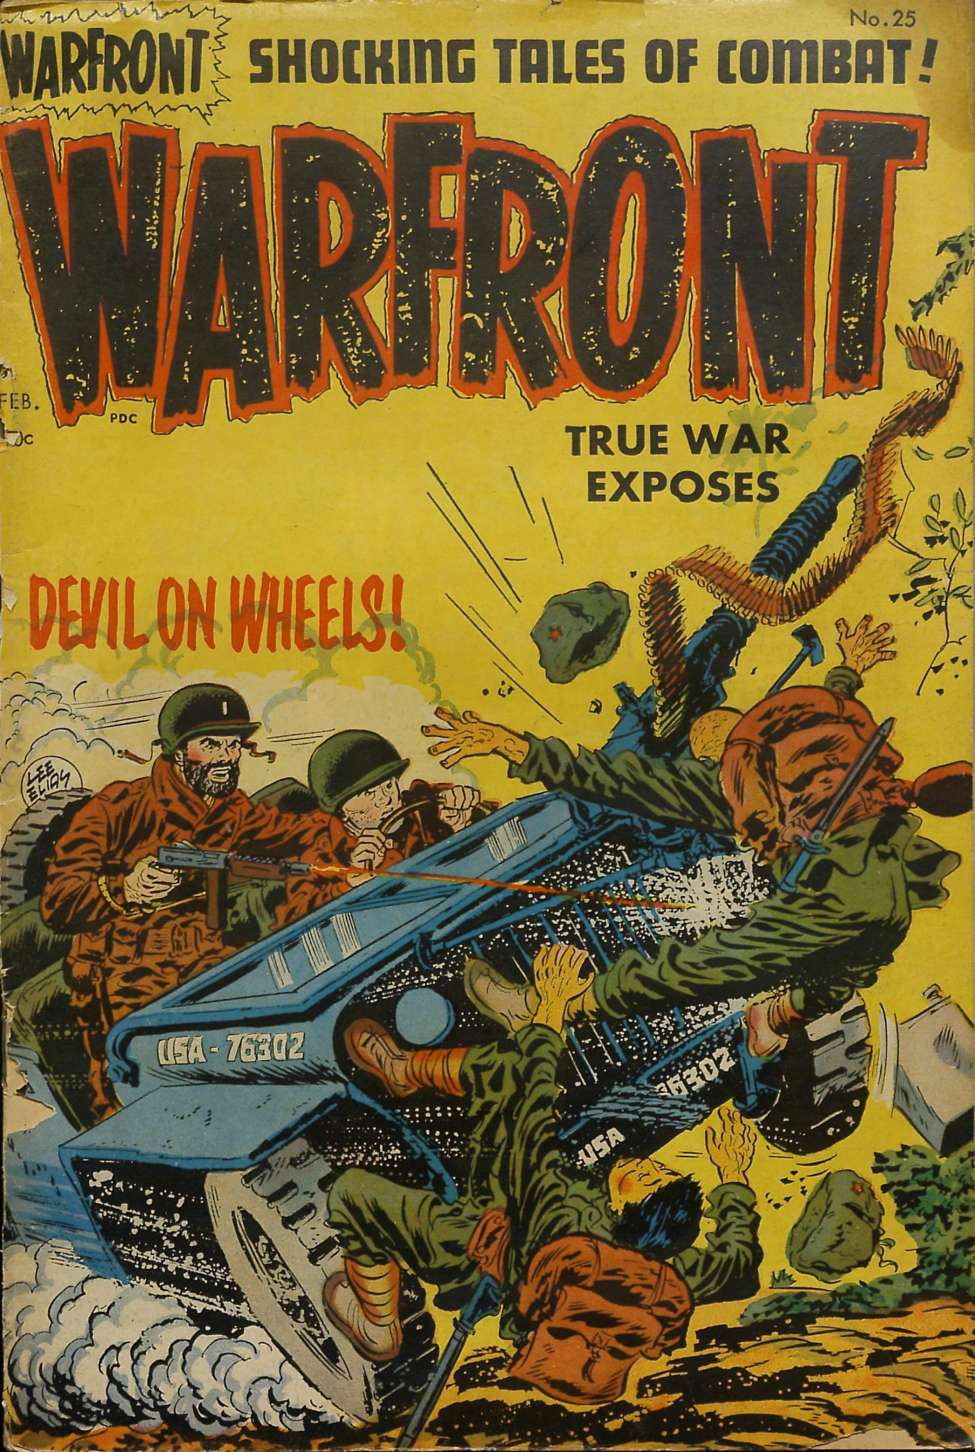 Comic Book Cover For Warfront 25 - Version 2